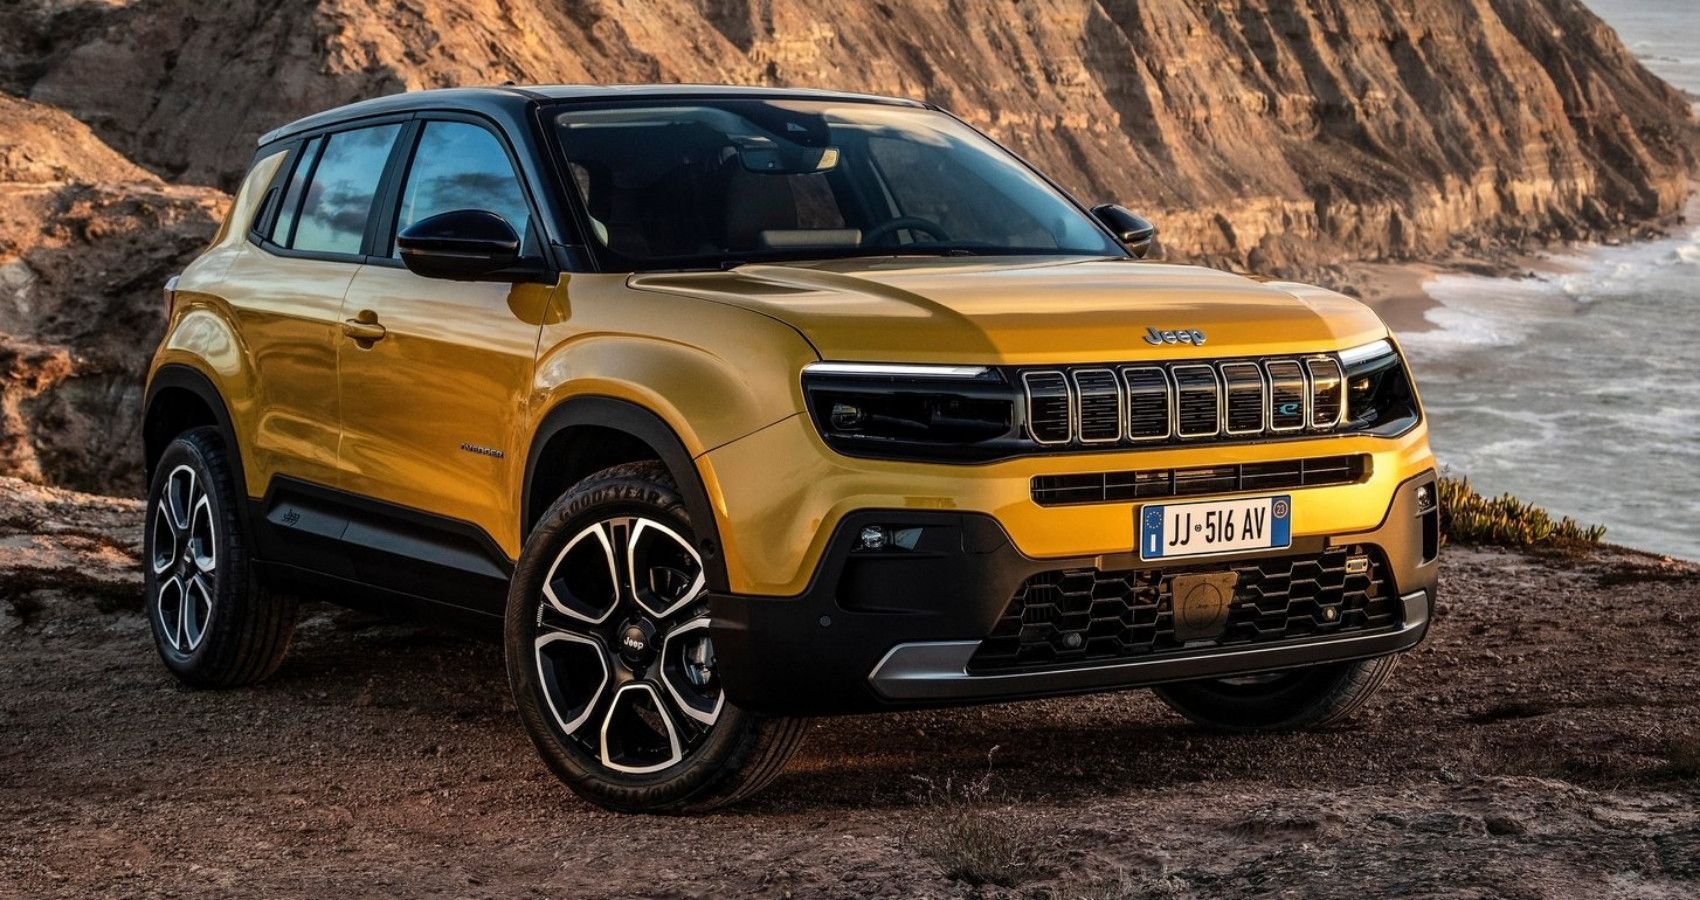 What We Know So Far About The All-Electric 2023 Jeep Avenger SUV